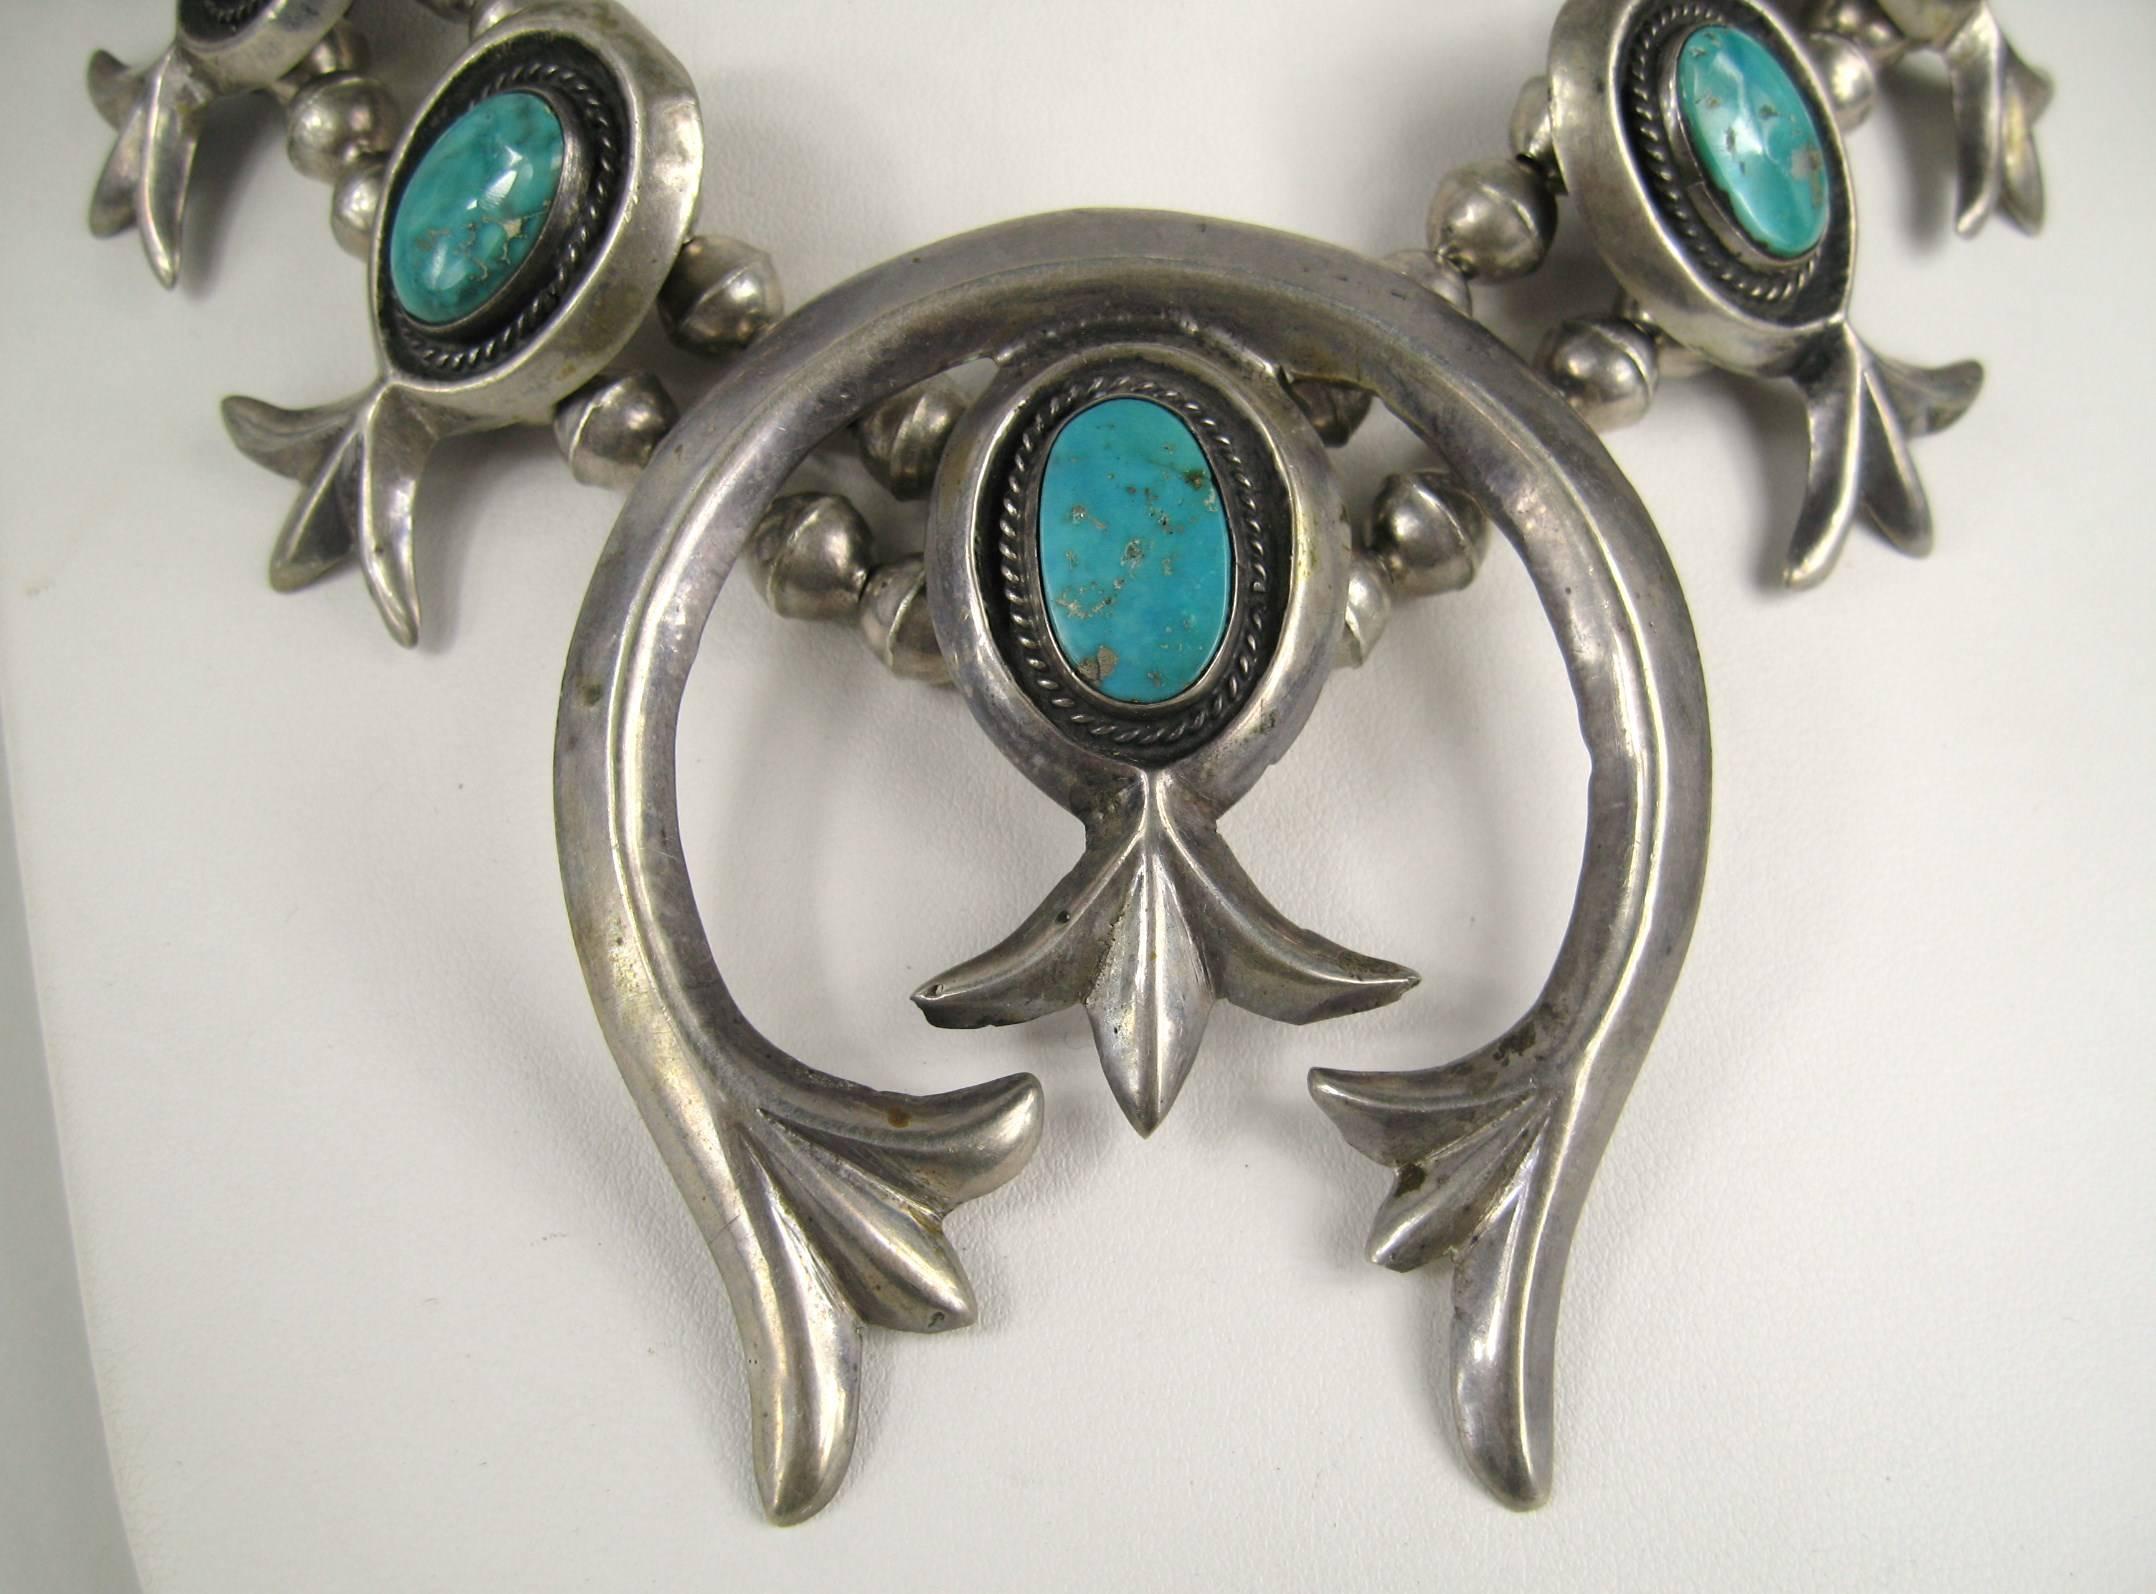 Gorgeous Old Pawn Navajo Squash Necklace. Large Naja at the center 
Double beaded chain 
Sterling Silver Sand cast 
A variety of turquoise stones set in this one 
Chain is 26